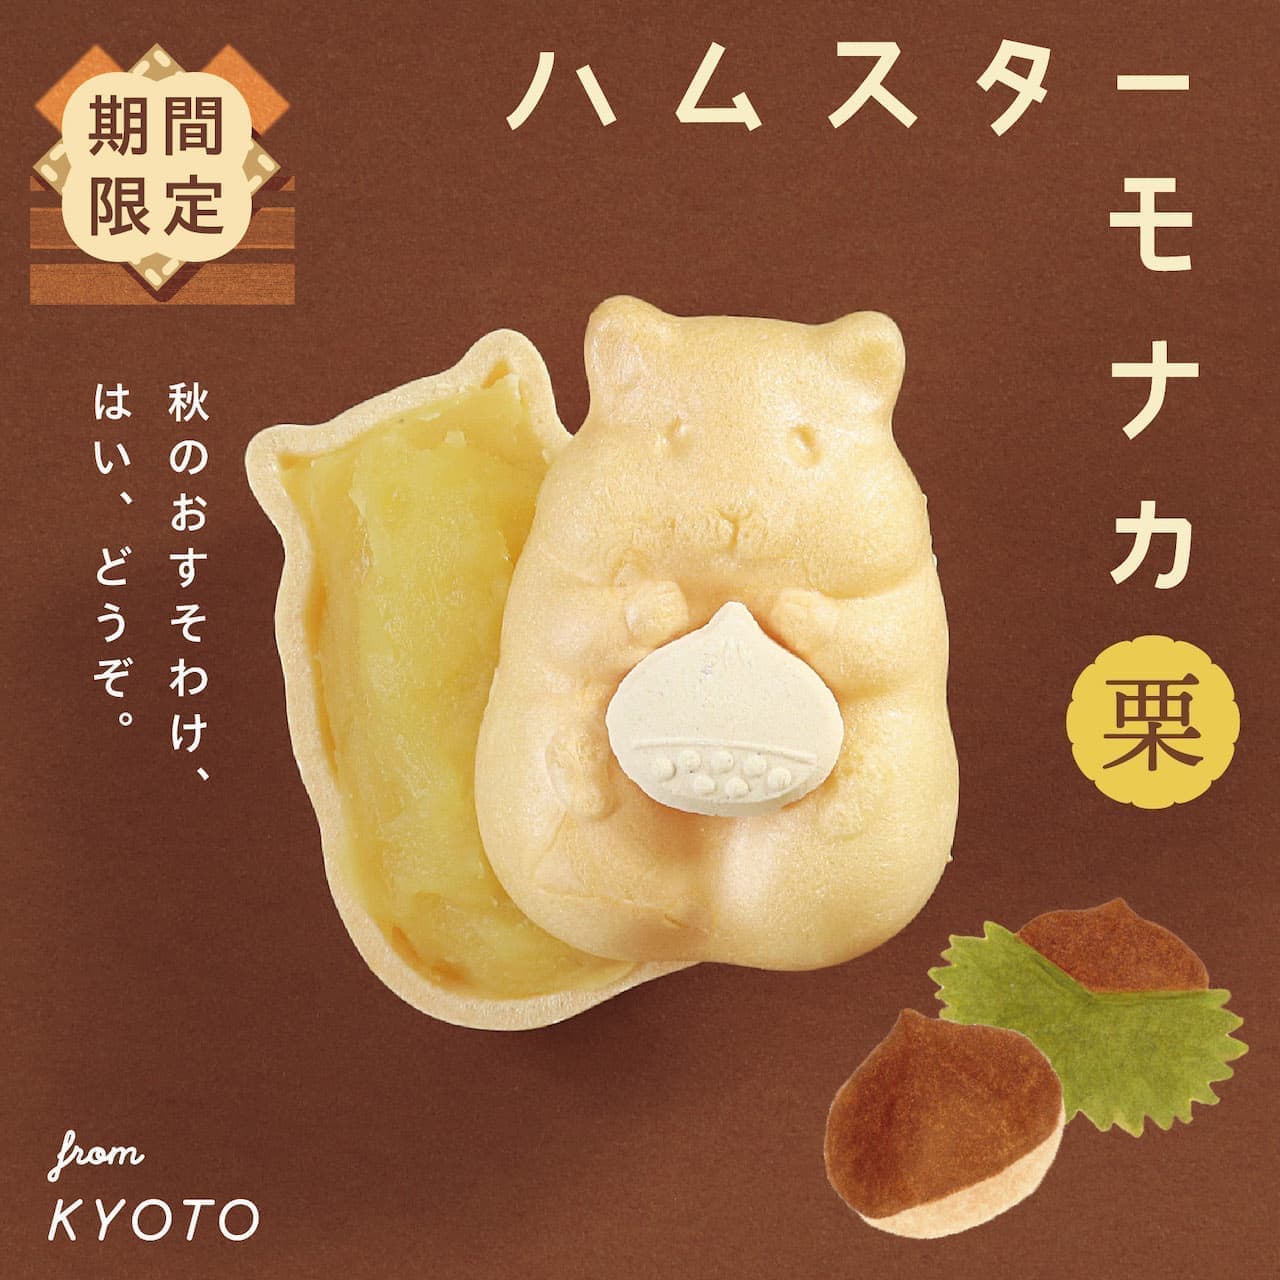 Hamster Monaka Chestnut Bean Paste Version - Limited time only